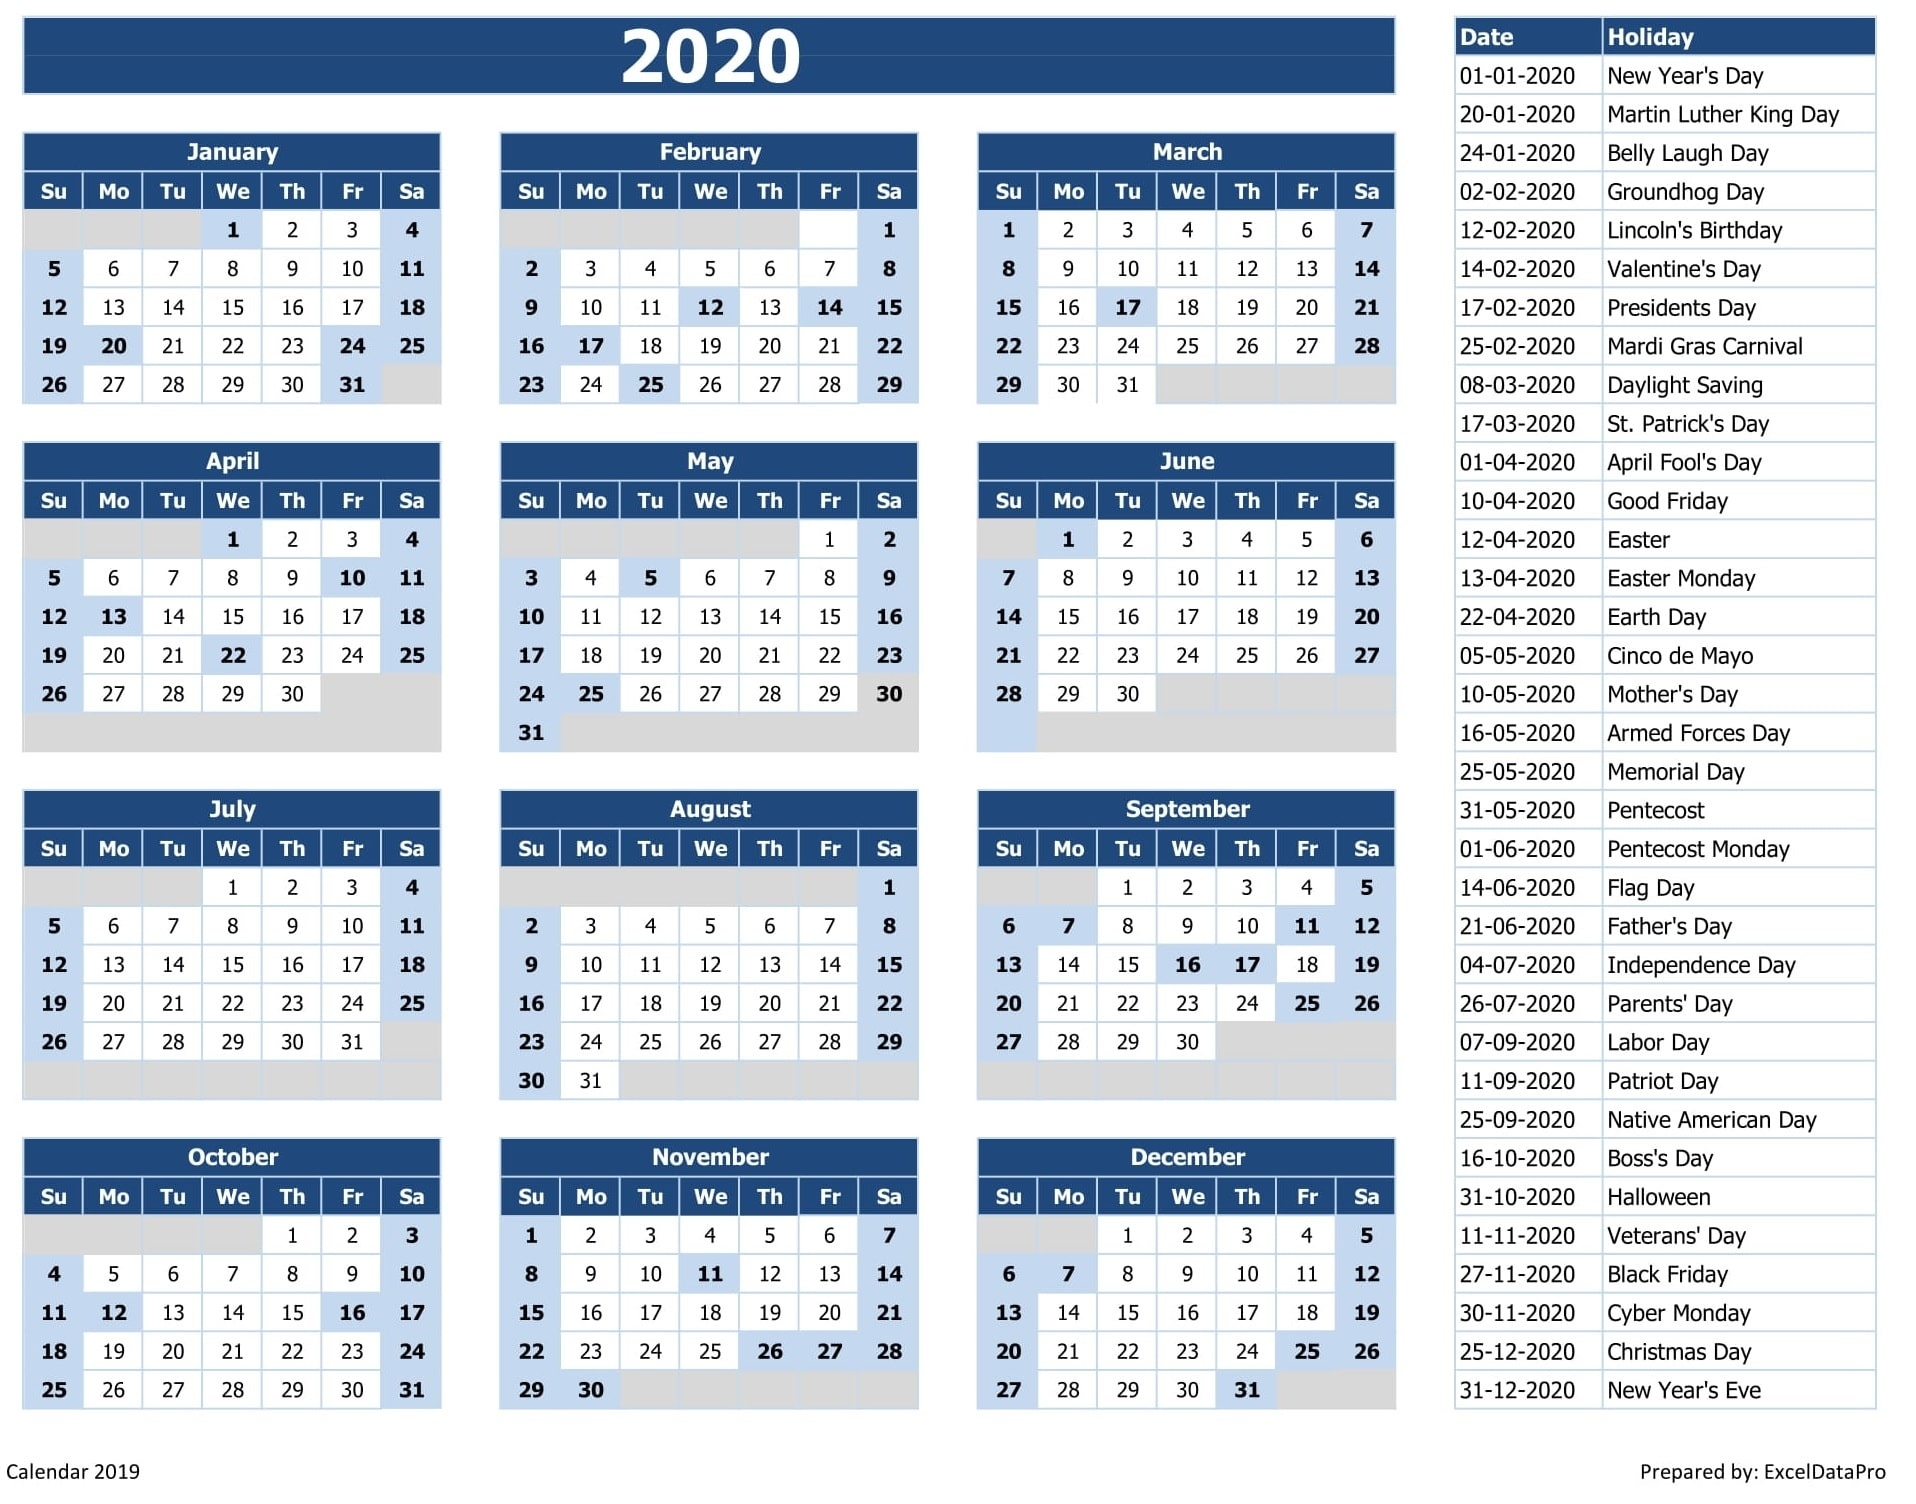 2020 Calendar Excel Templates, Printable Pdfs &amp; Images 2020 List Of Holidays Printable